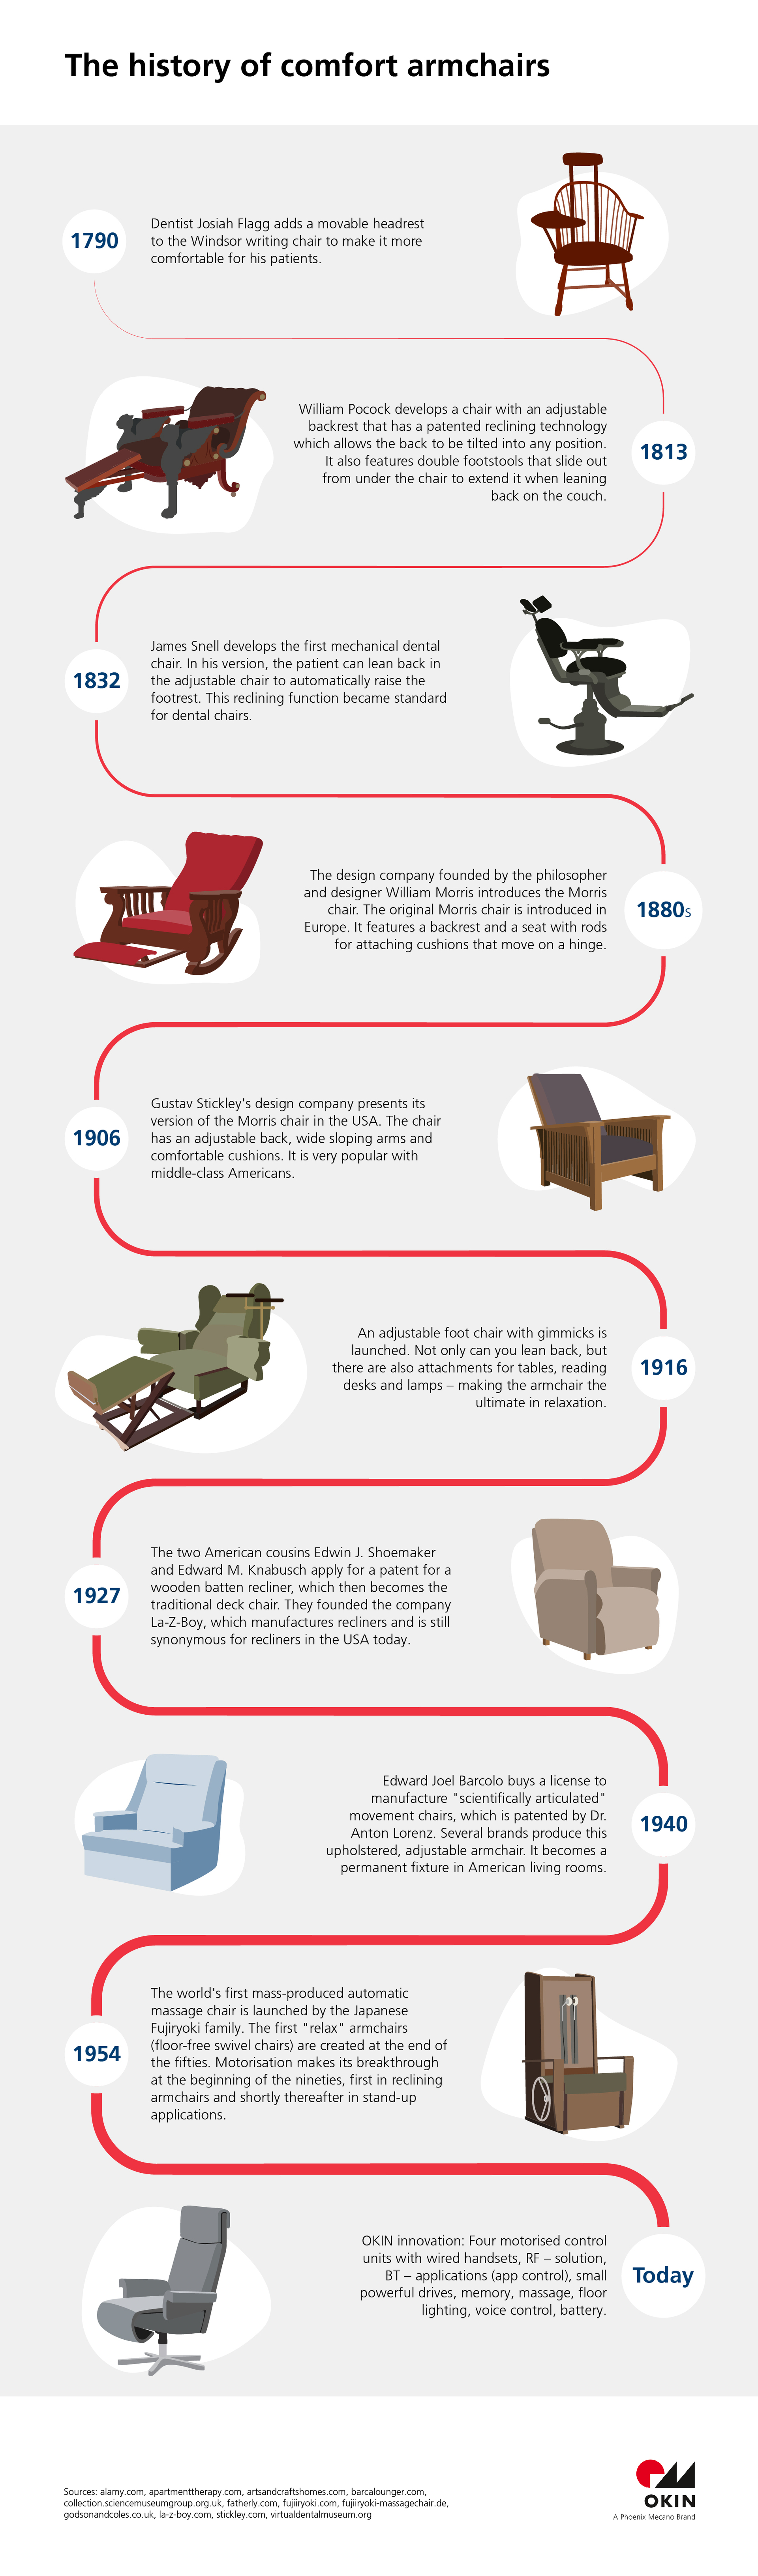 OKIN: The history of the armchair